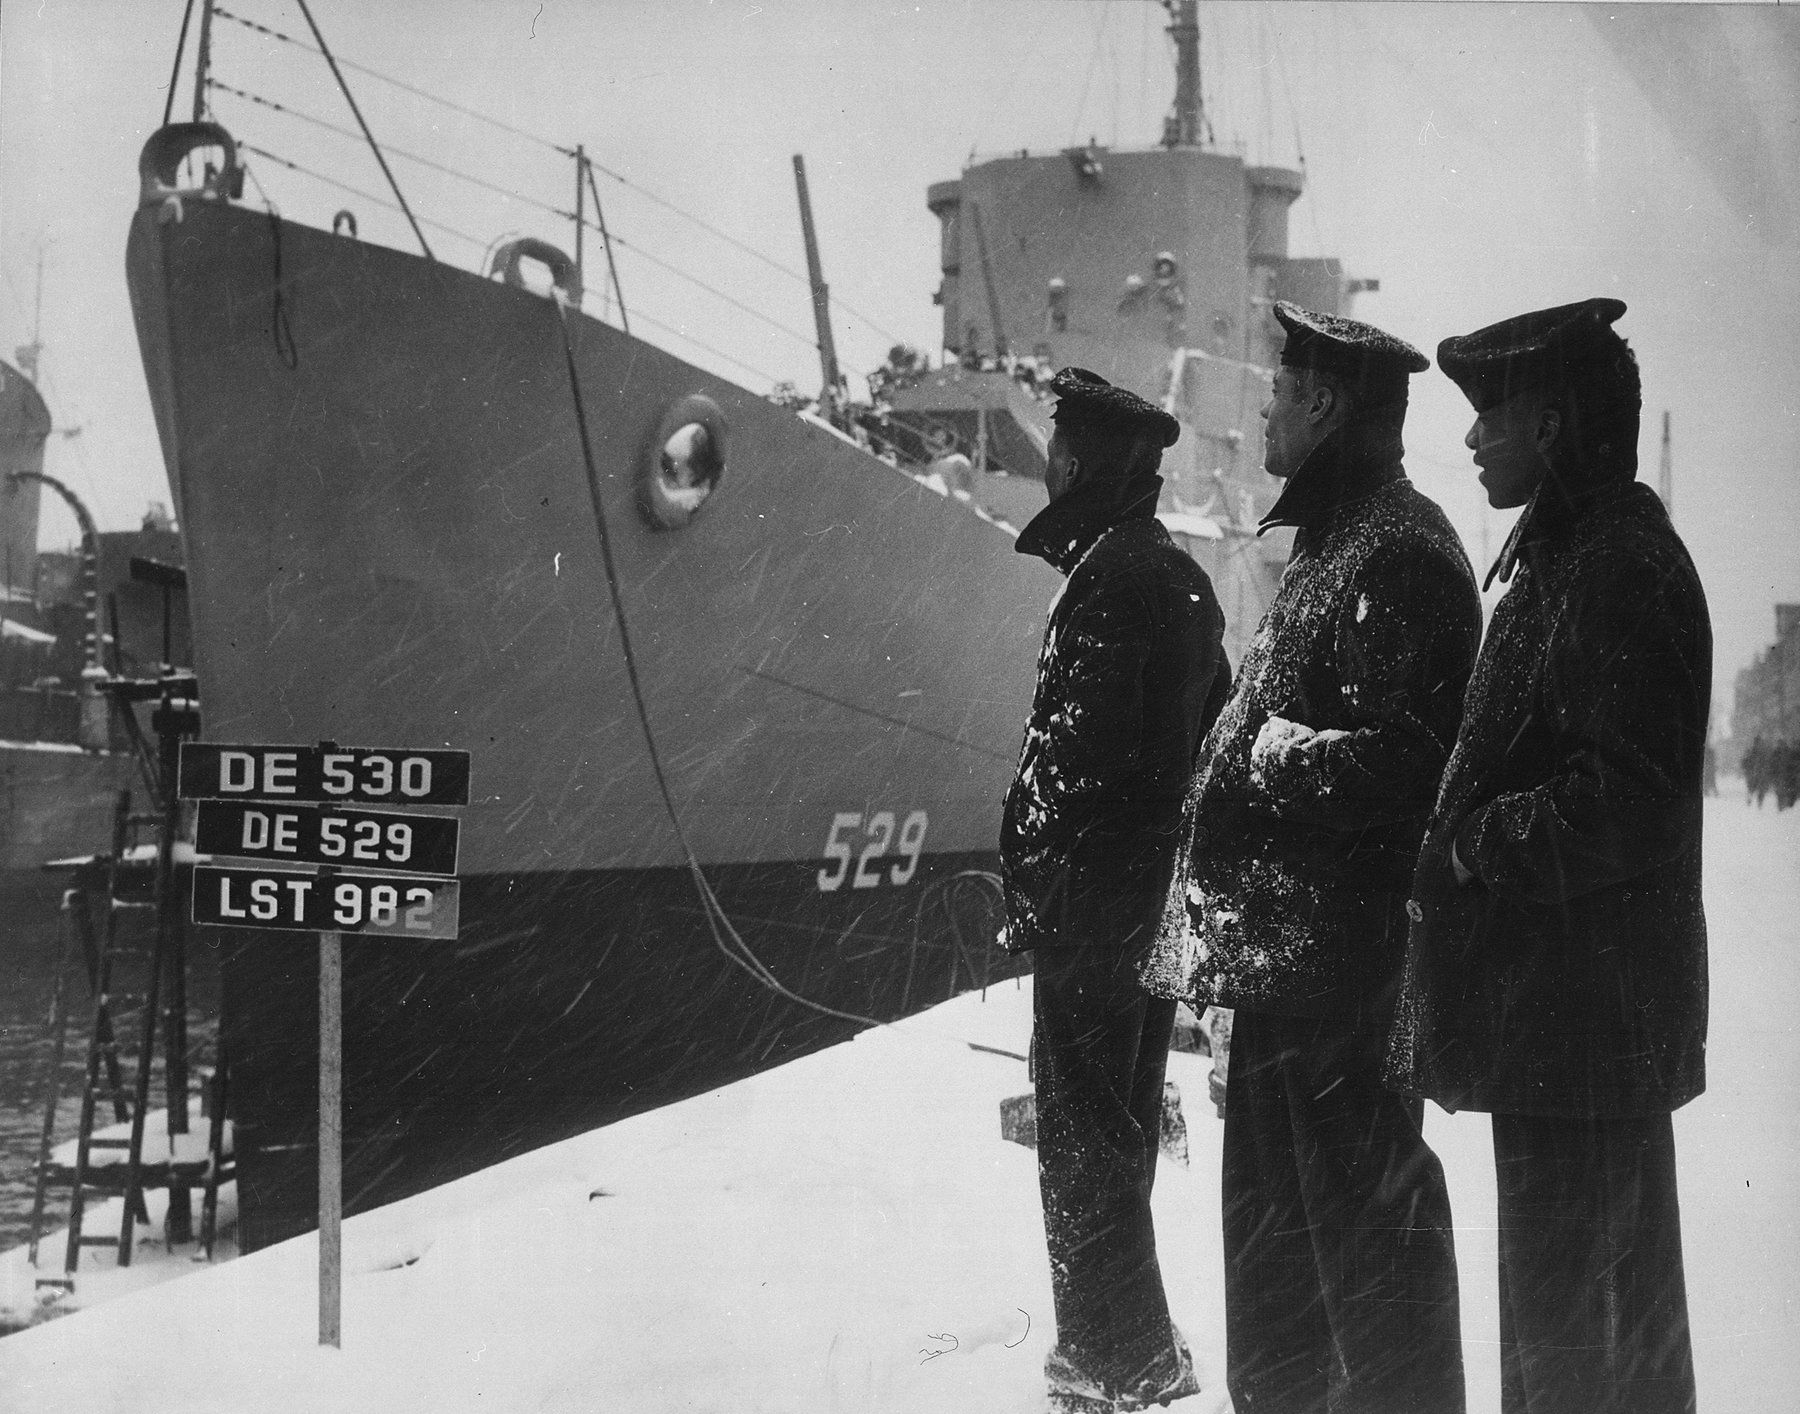 What Was Life Like for Sailors During the Battle of the Atlantic